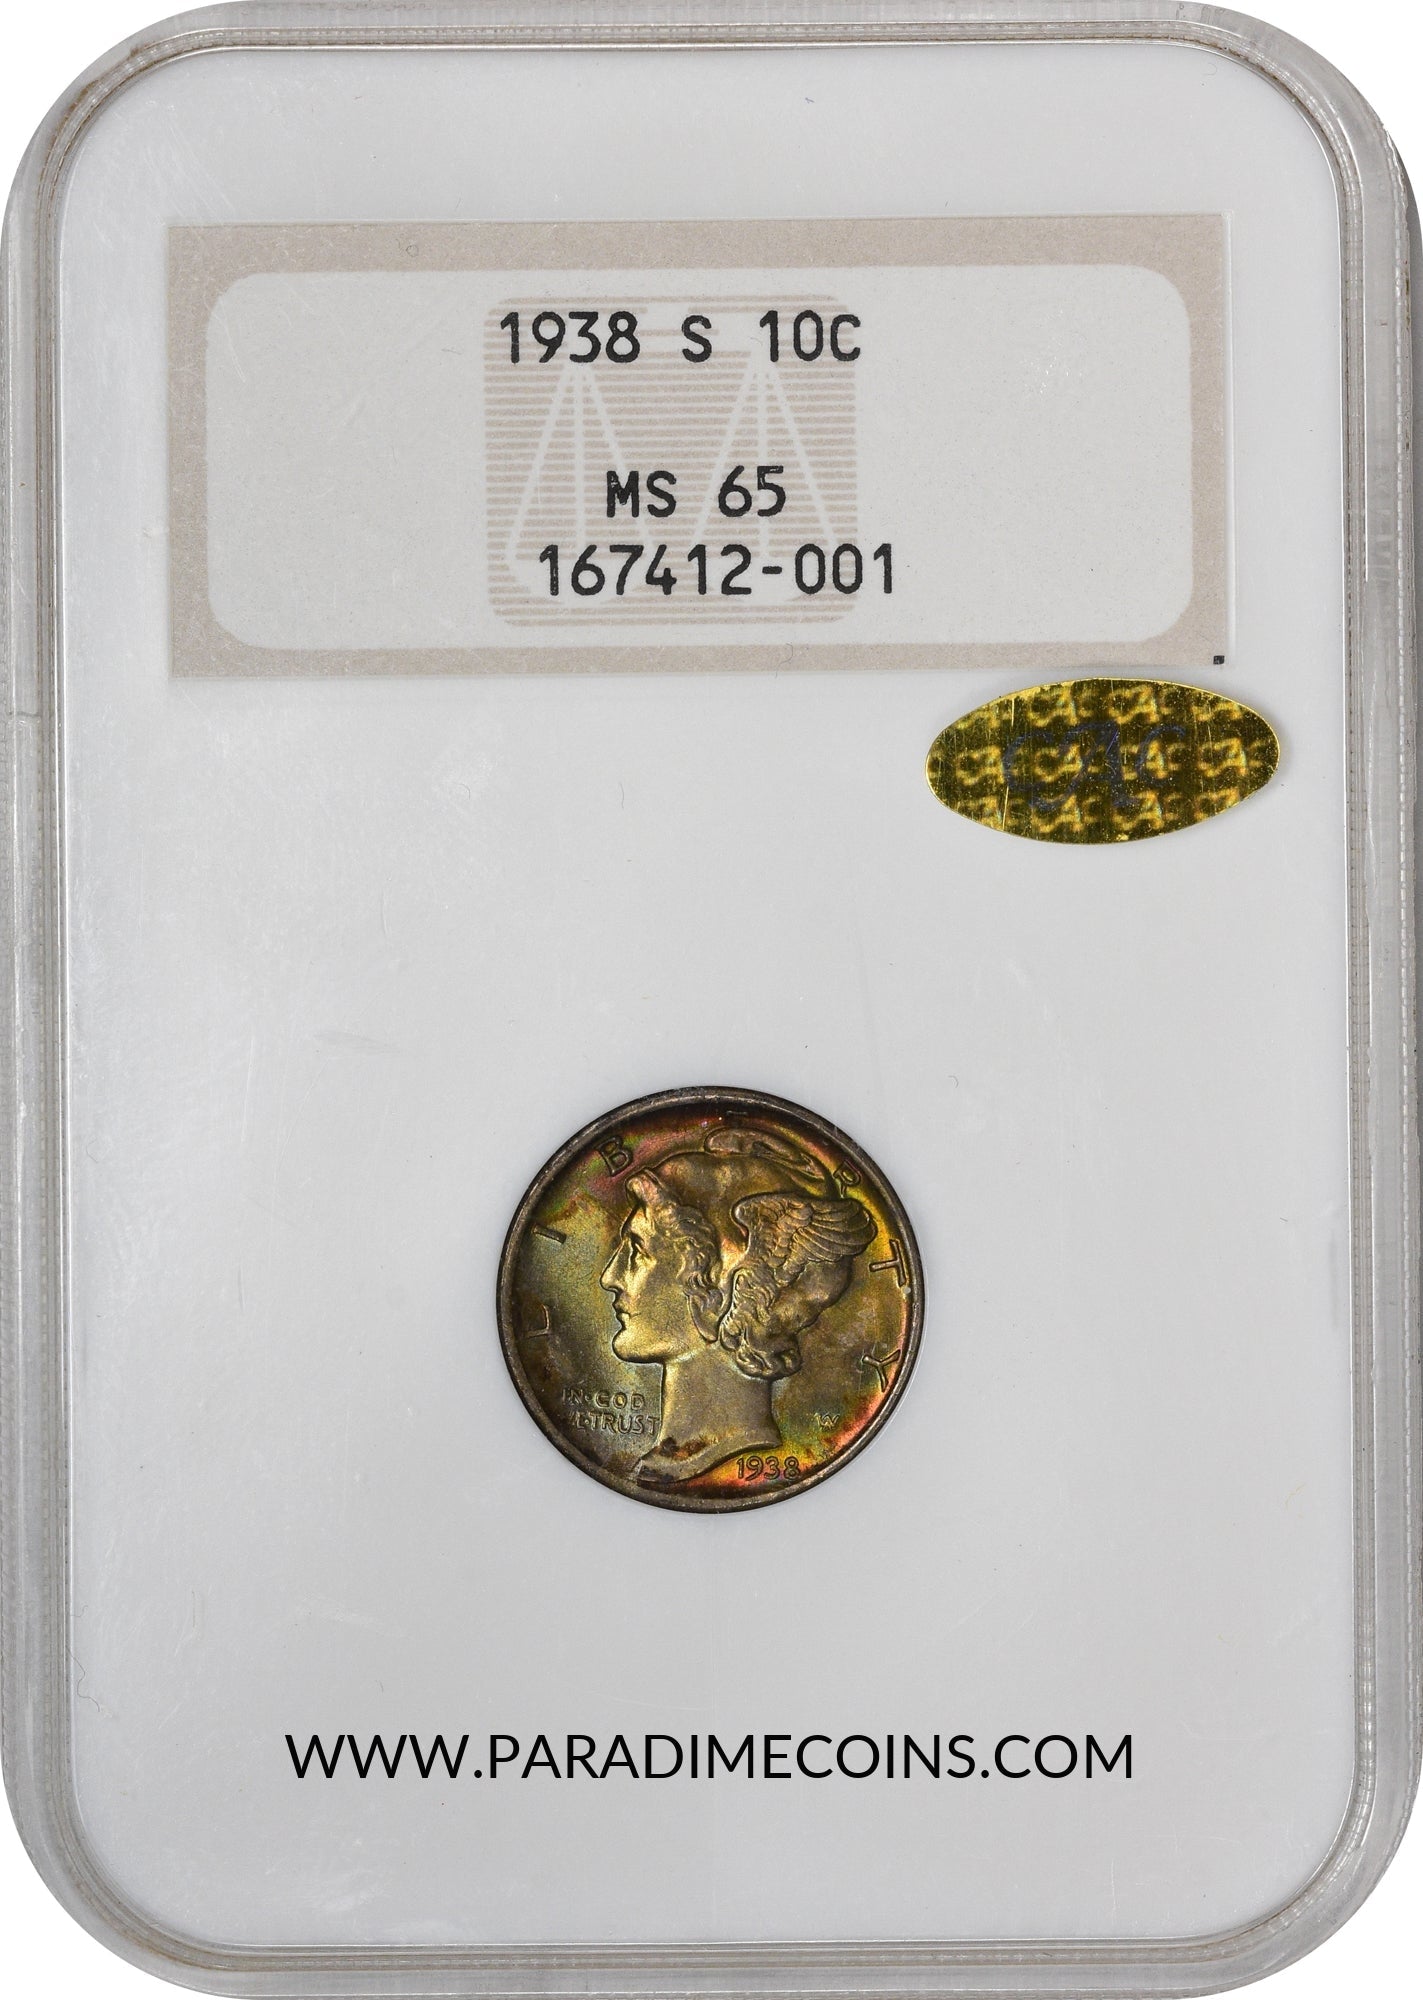 1938-S 10C MS65 NGC OH GOLD CAC - Paradime Coins | PCGS NGC CACG CAC Rare US Numismatic Coins For Sale